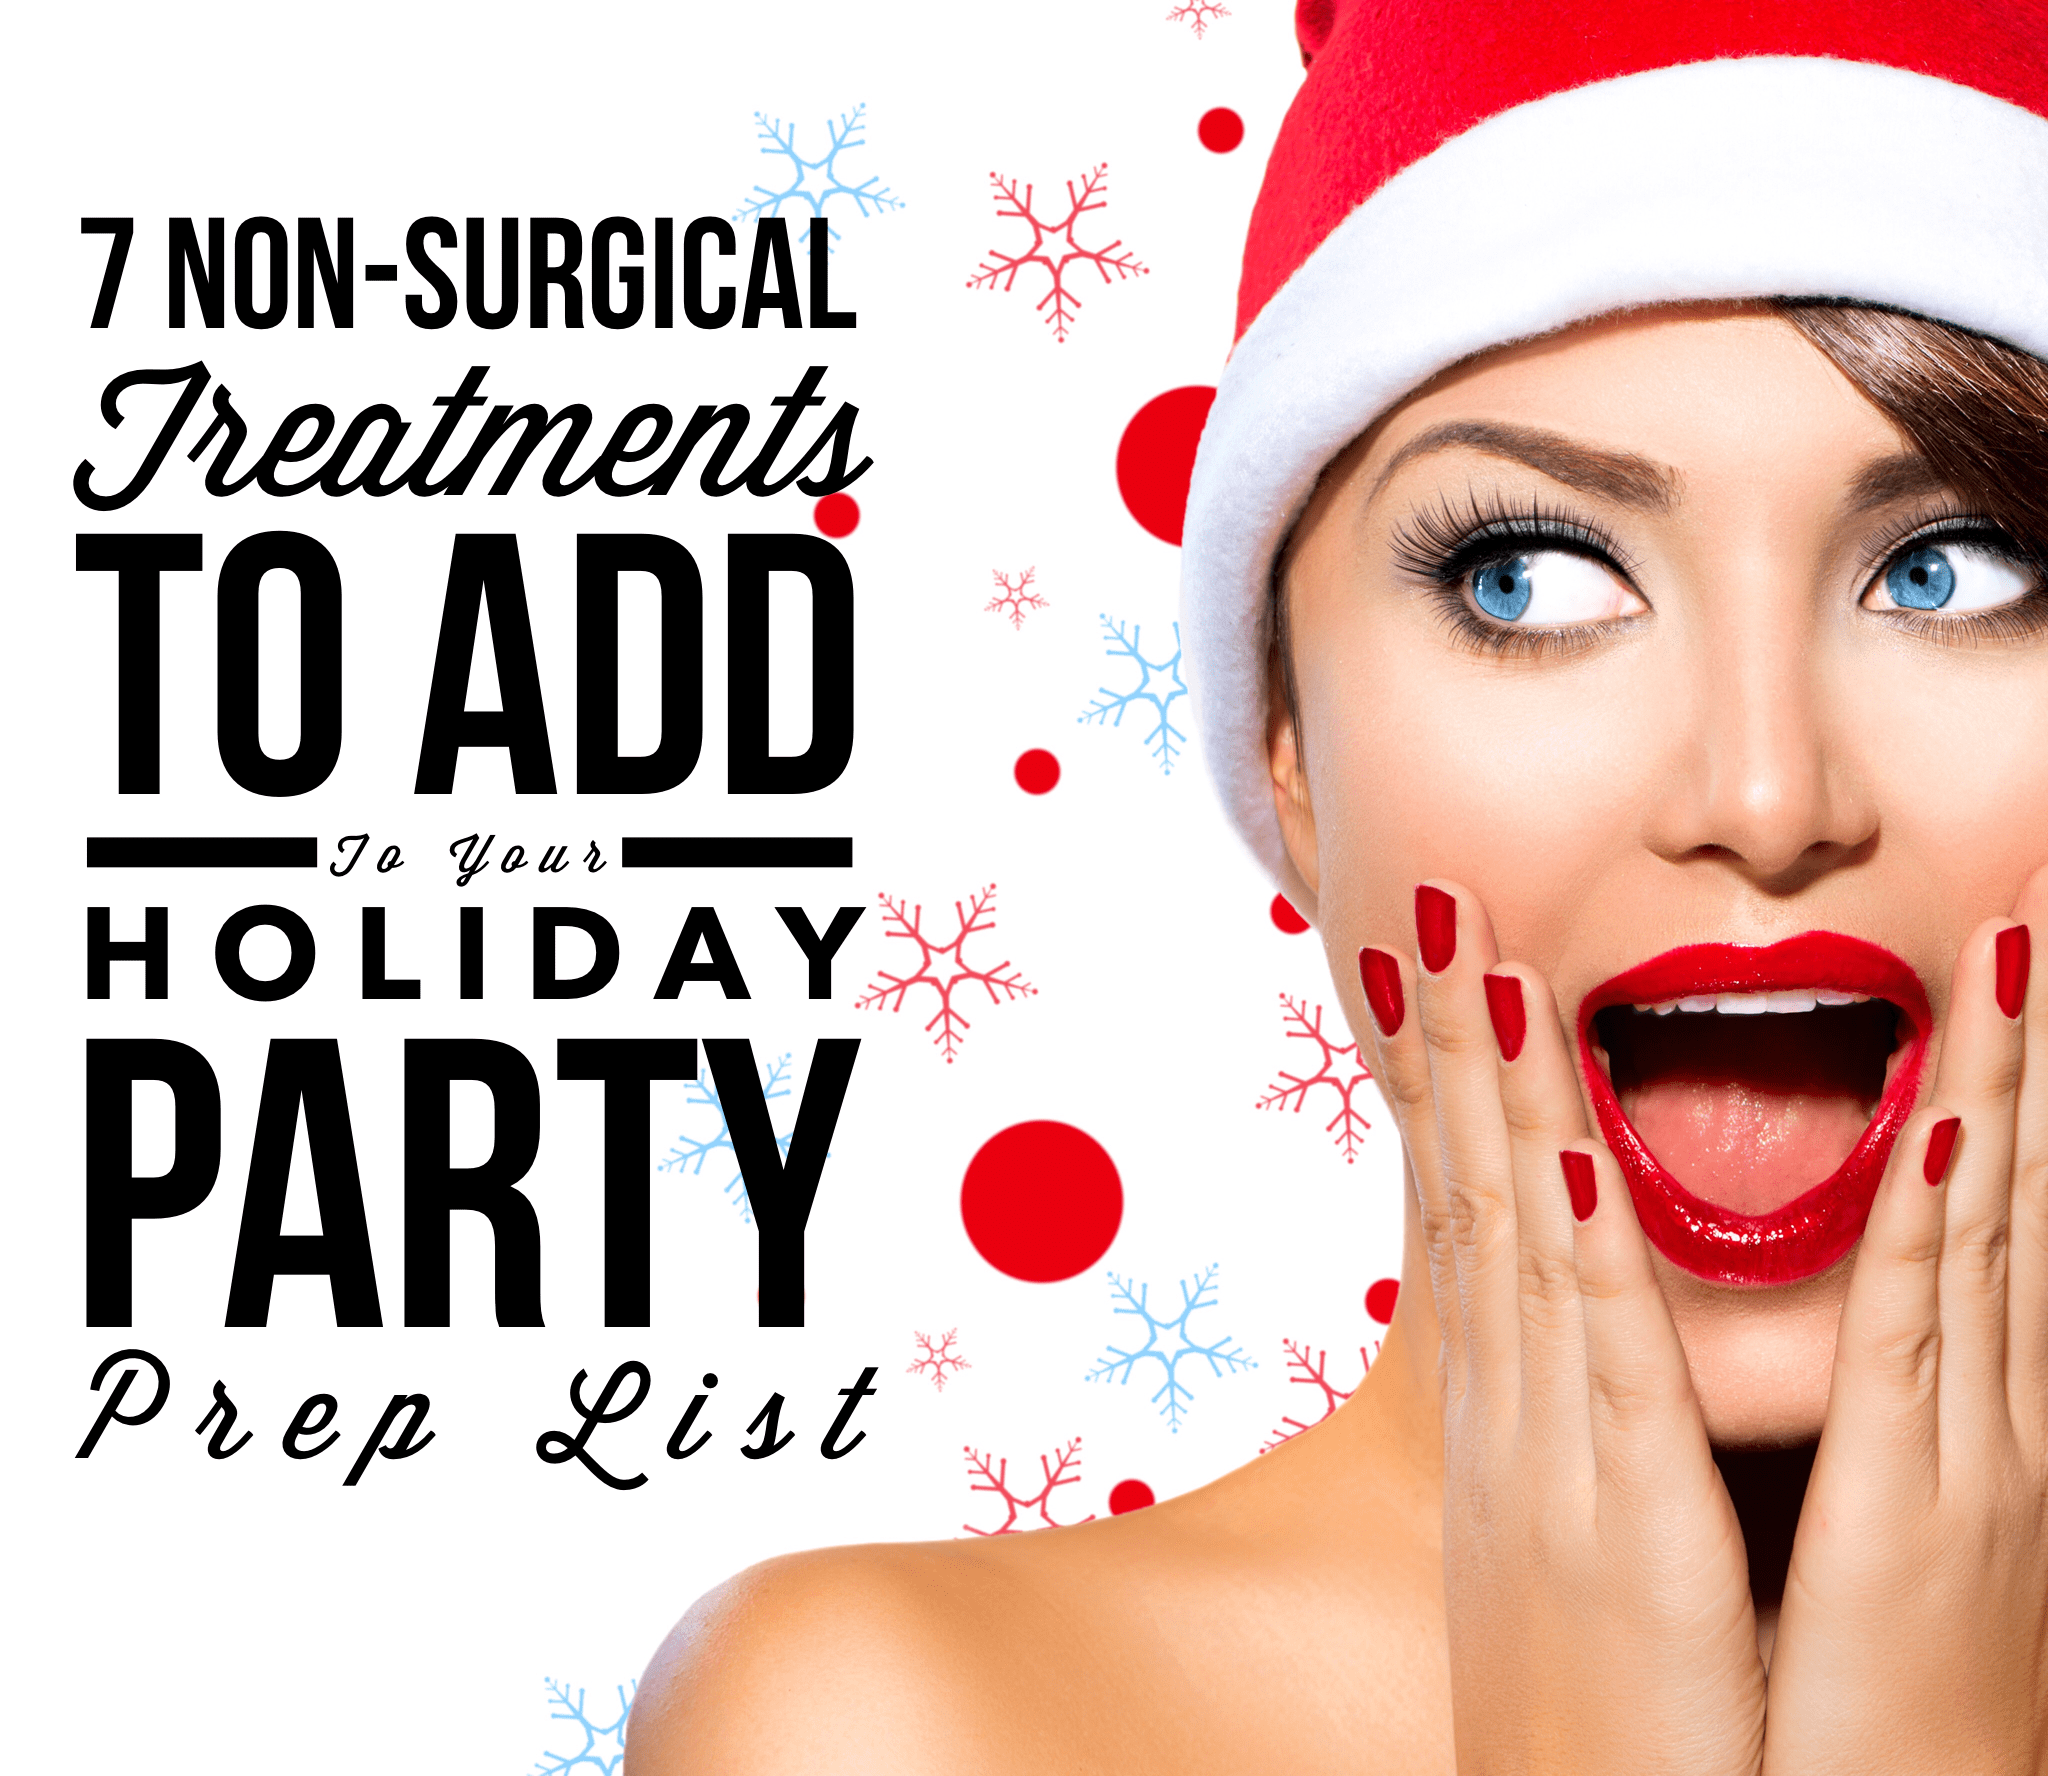 7-non-surgical-treatments-to-add-to-your-holiday-party-prep-list